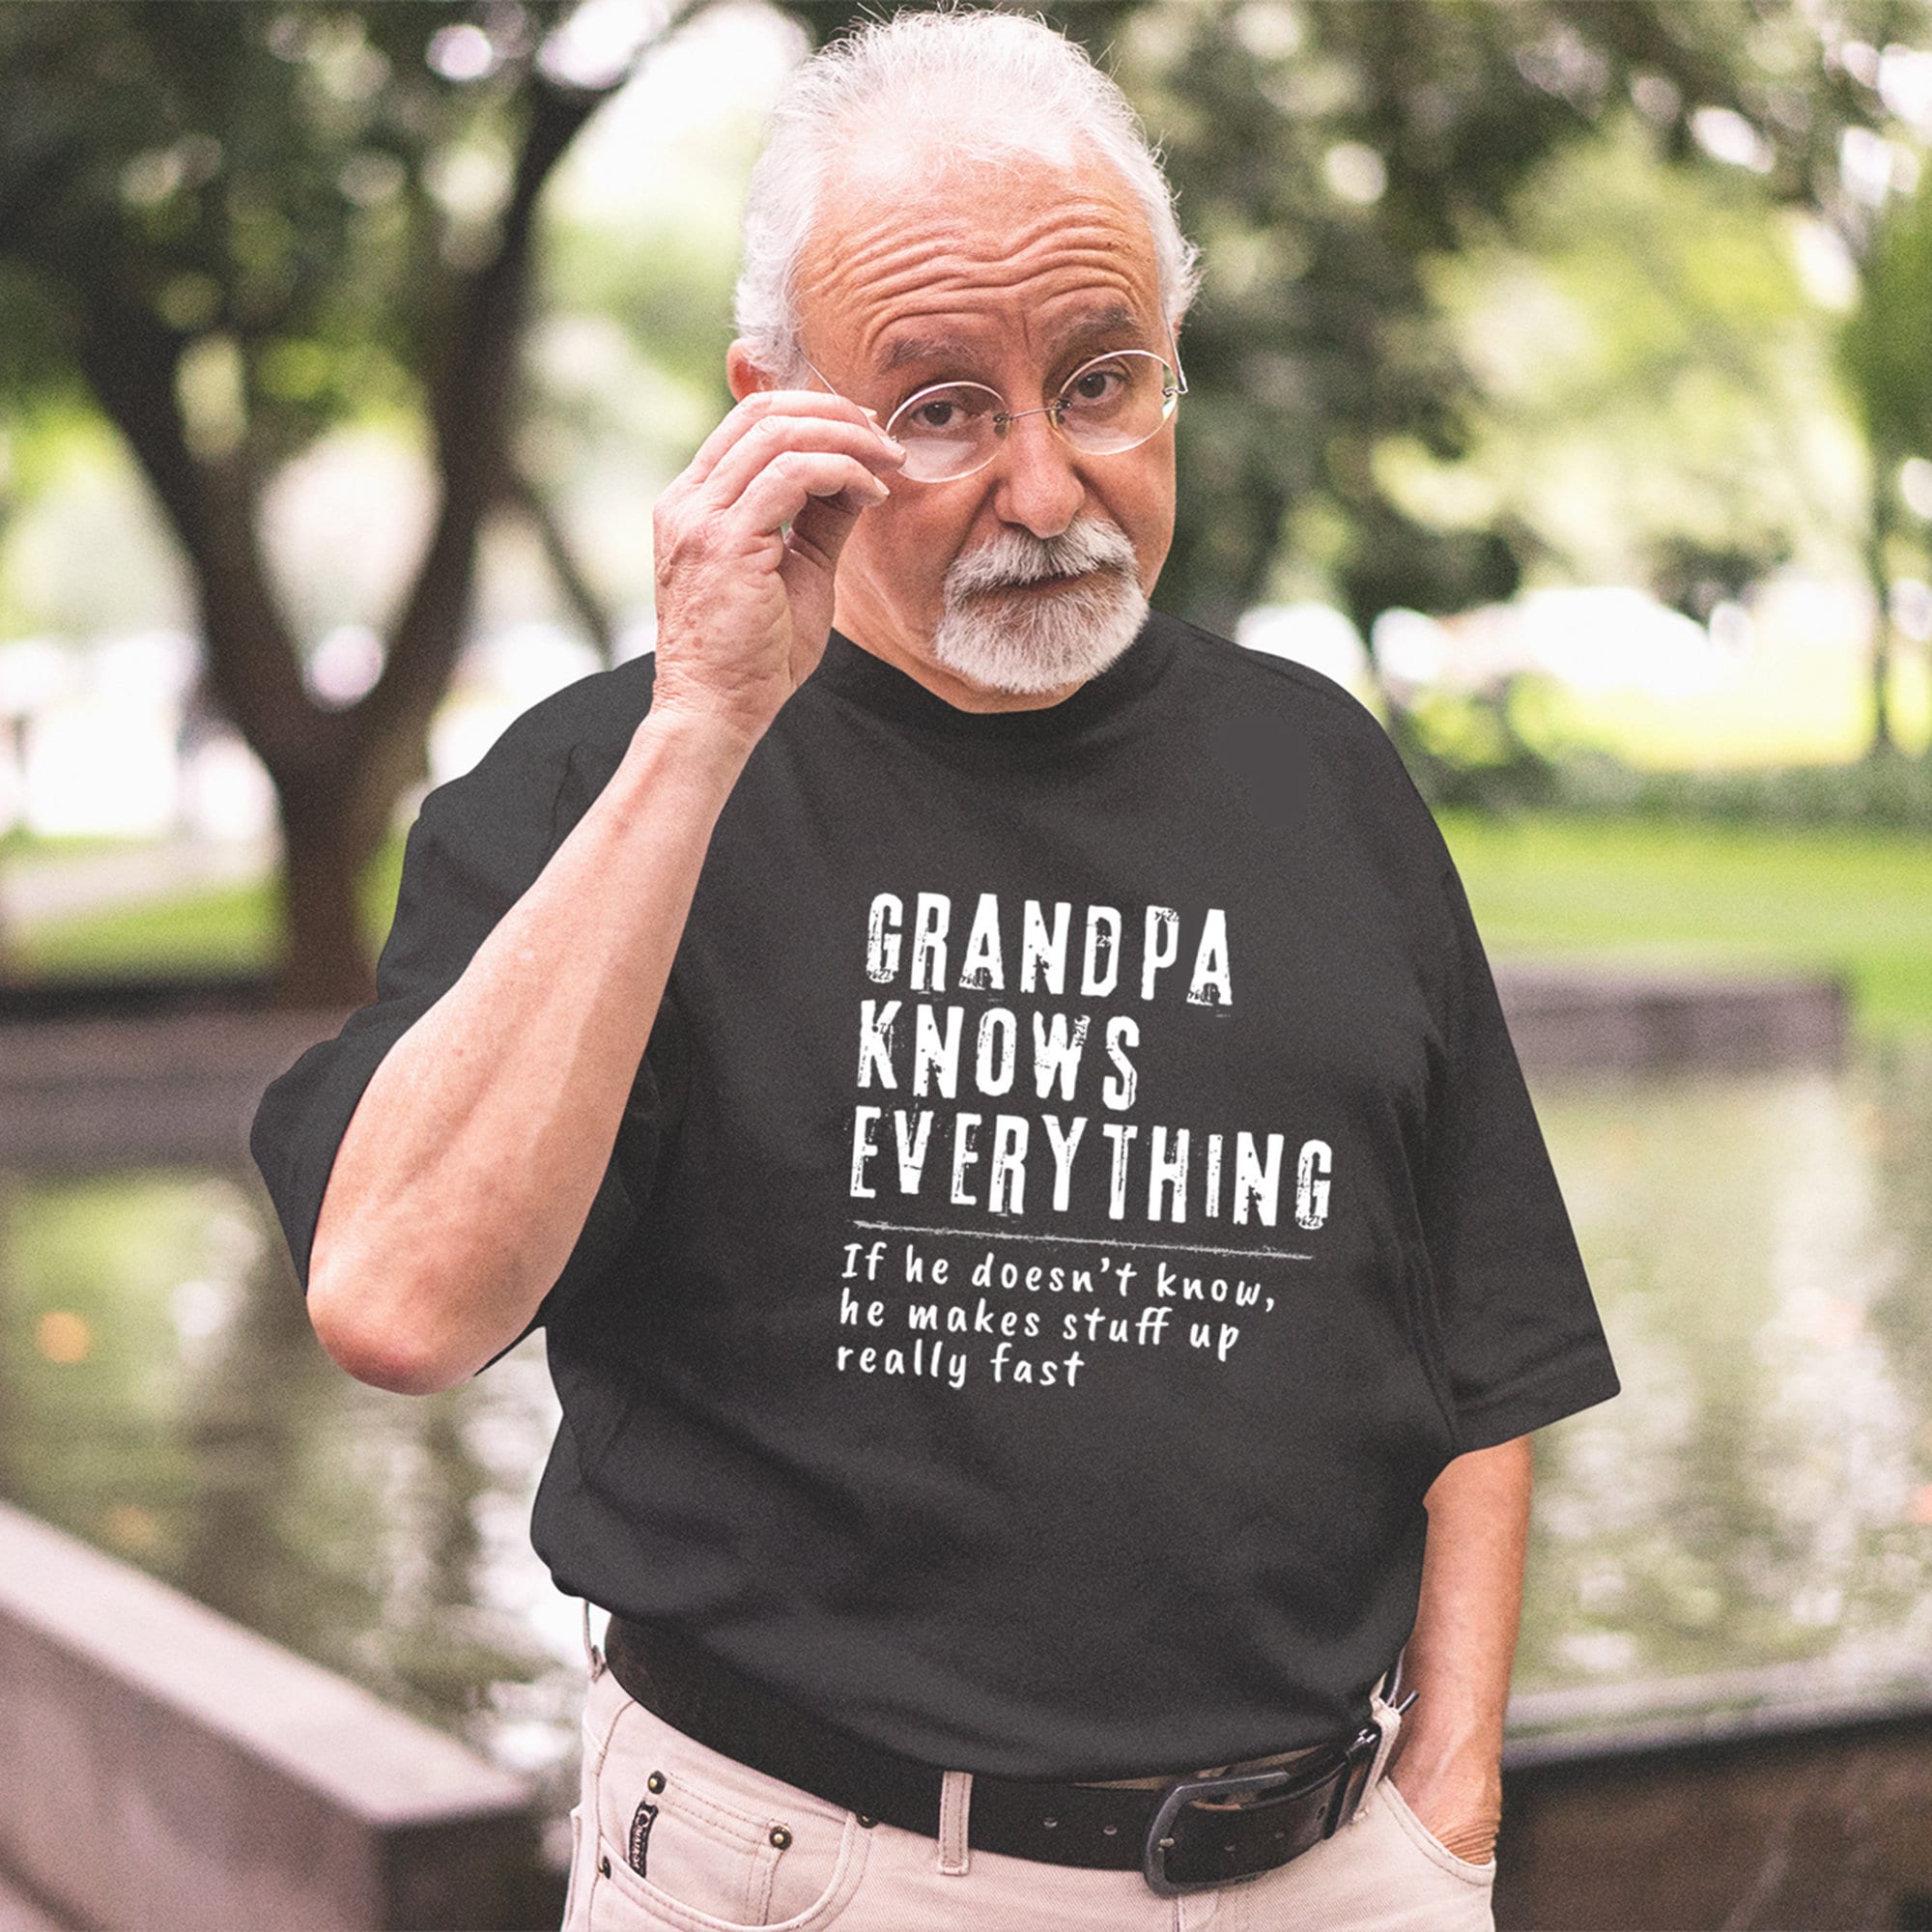 Funny Mens T Shirt Christmas Gift For Great Grandpa Gift Great Grandparents Gift Funny Grandpa Shirt Custom Shirts With Design Saying